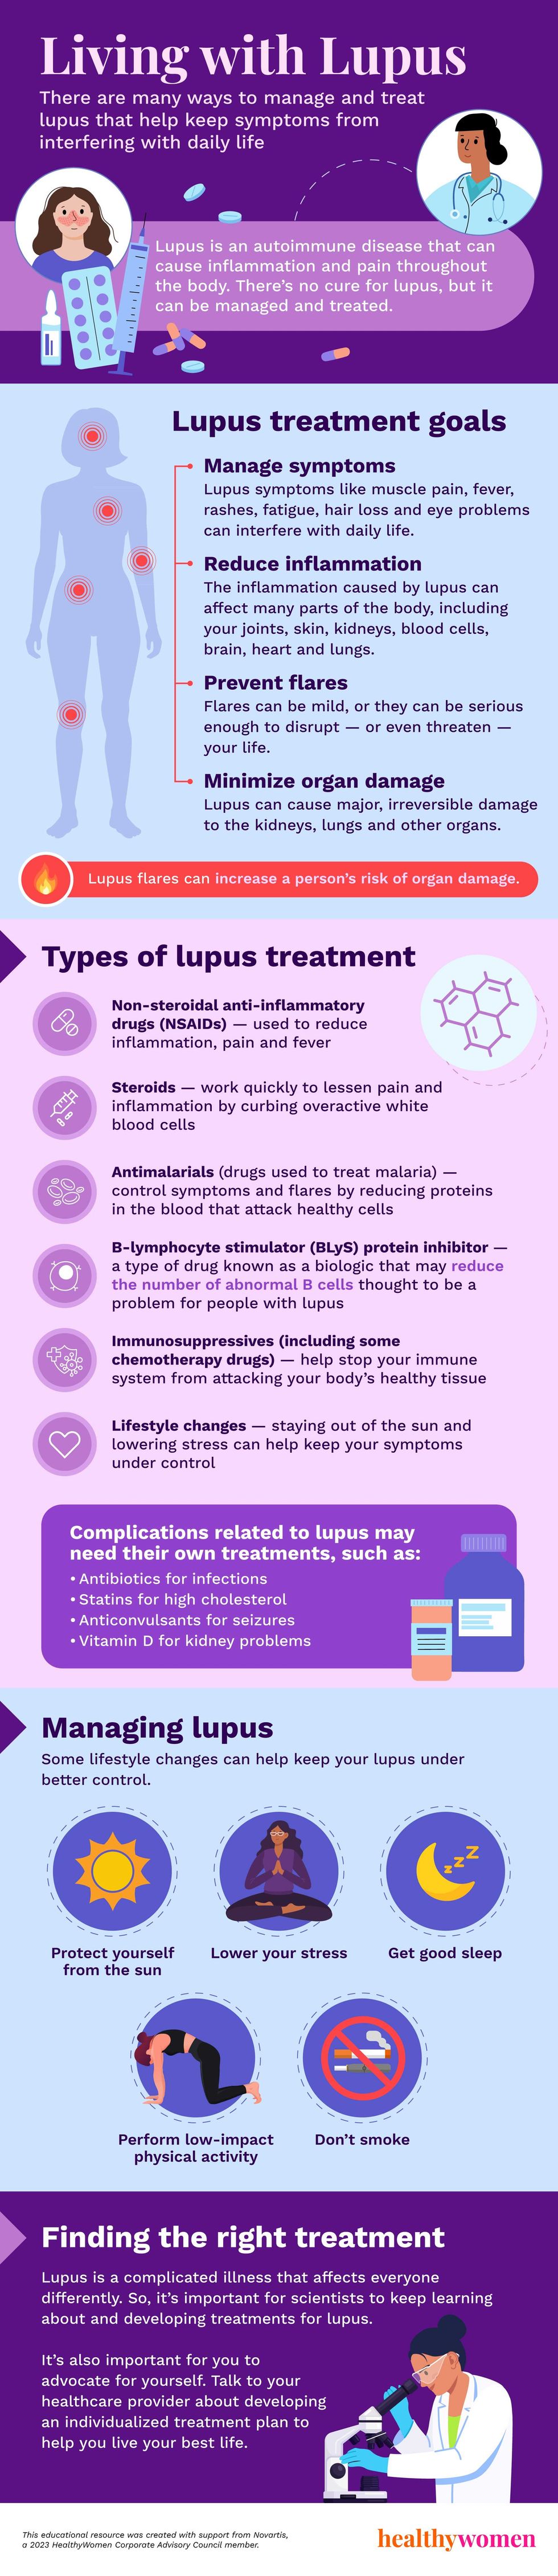 Infographic about living with lupus.  Click on the image to view PDF